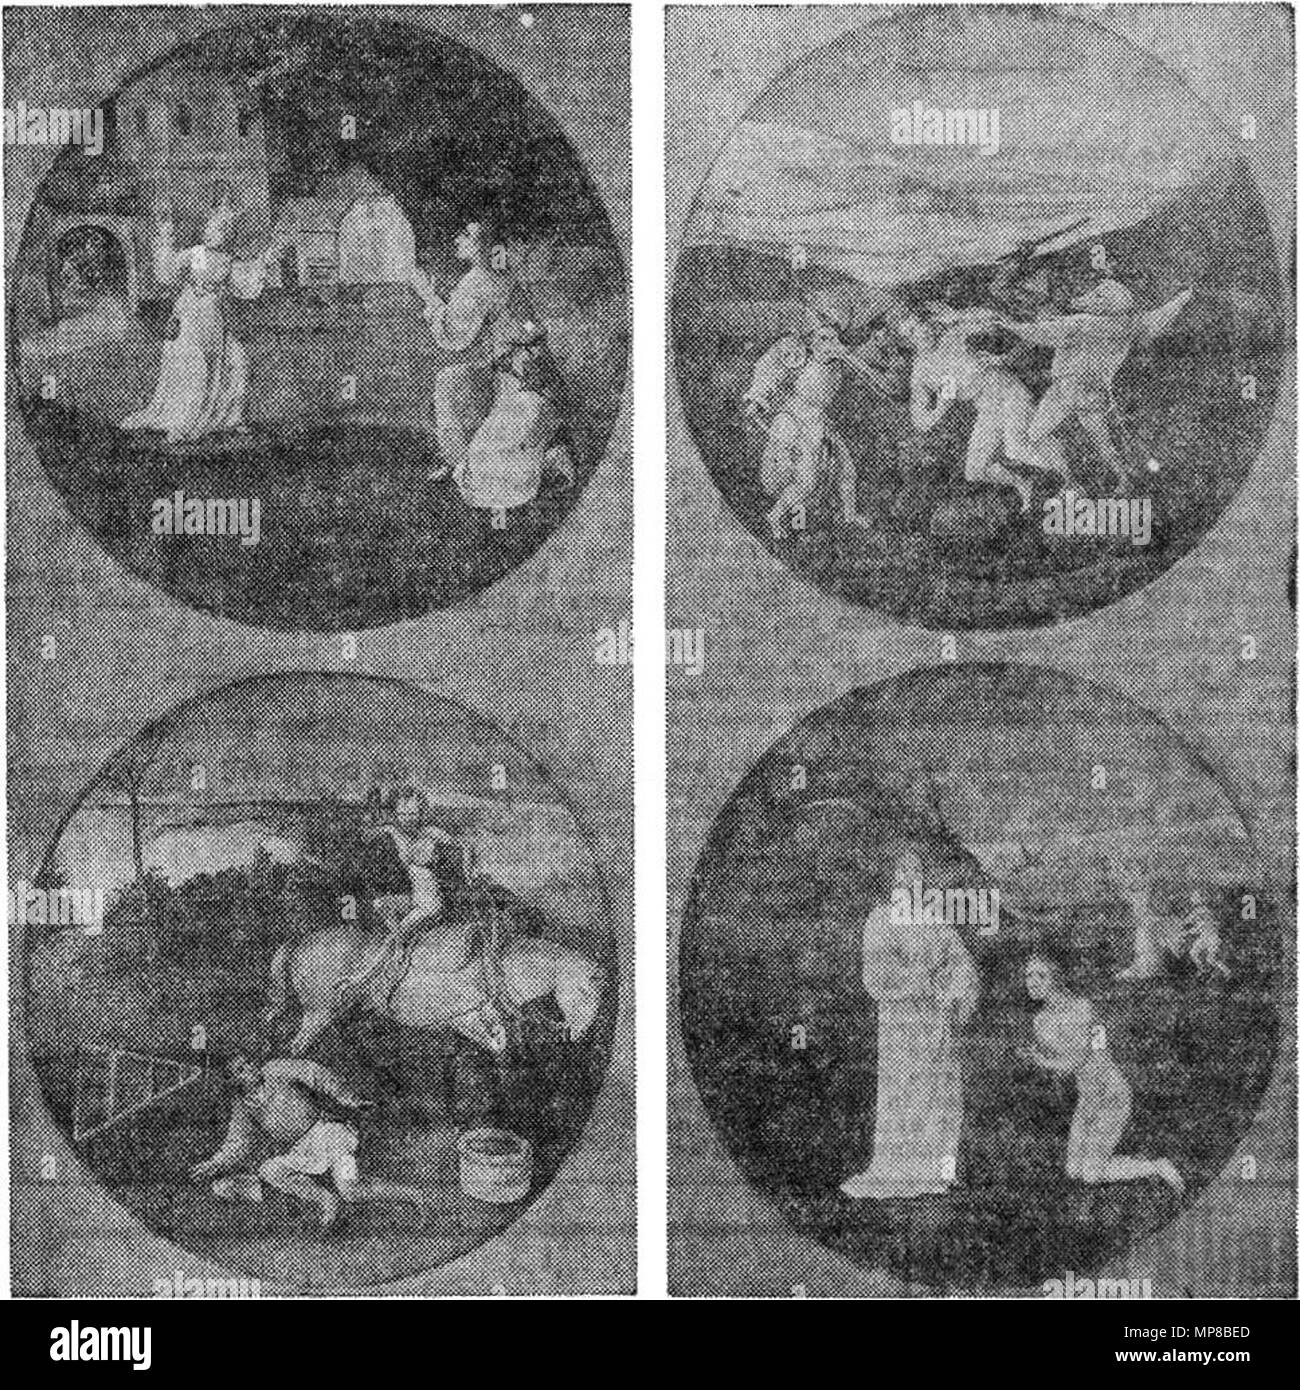 Medallions with Symbolic-Religious Representations. Fragments (exterior) of a triptych. See Jeroen Bosch De Zondvloed Binnenzijde for the interior. Between 1508 and 1516.   719 Jheronimus Bosch 010 exterior 02 black and white version 01 Stock Photo